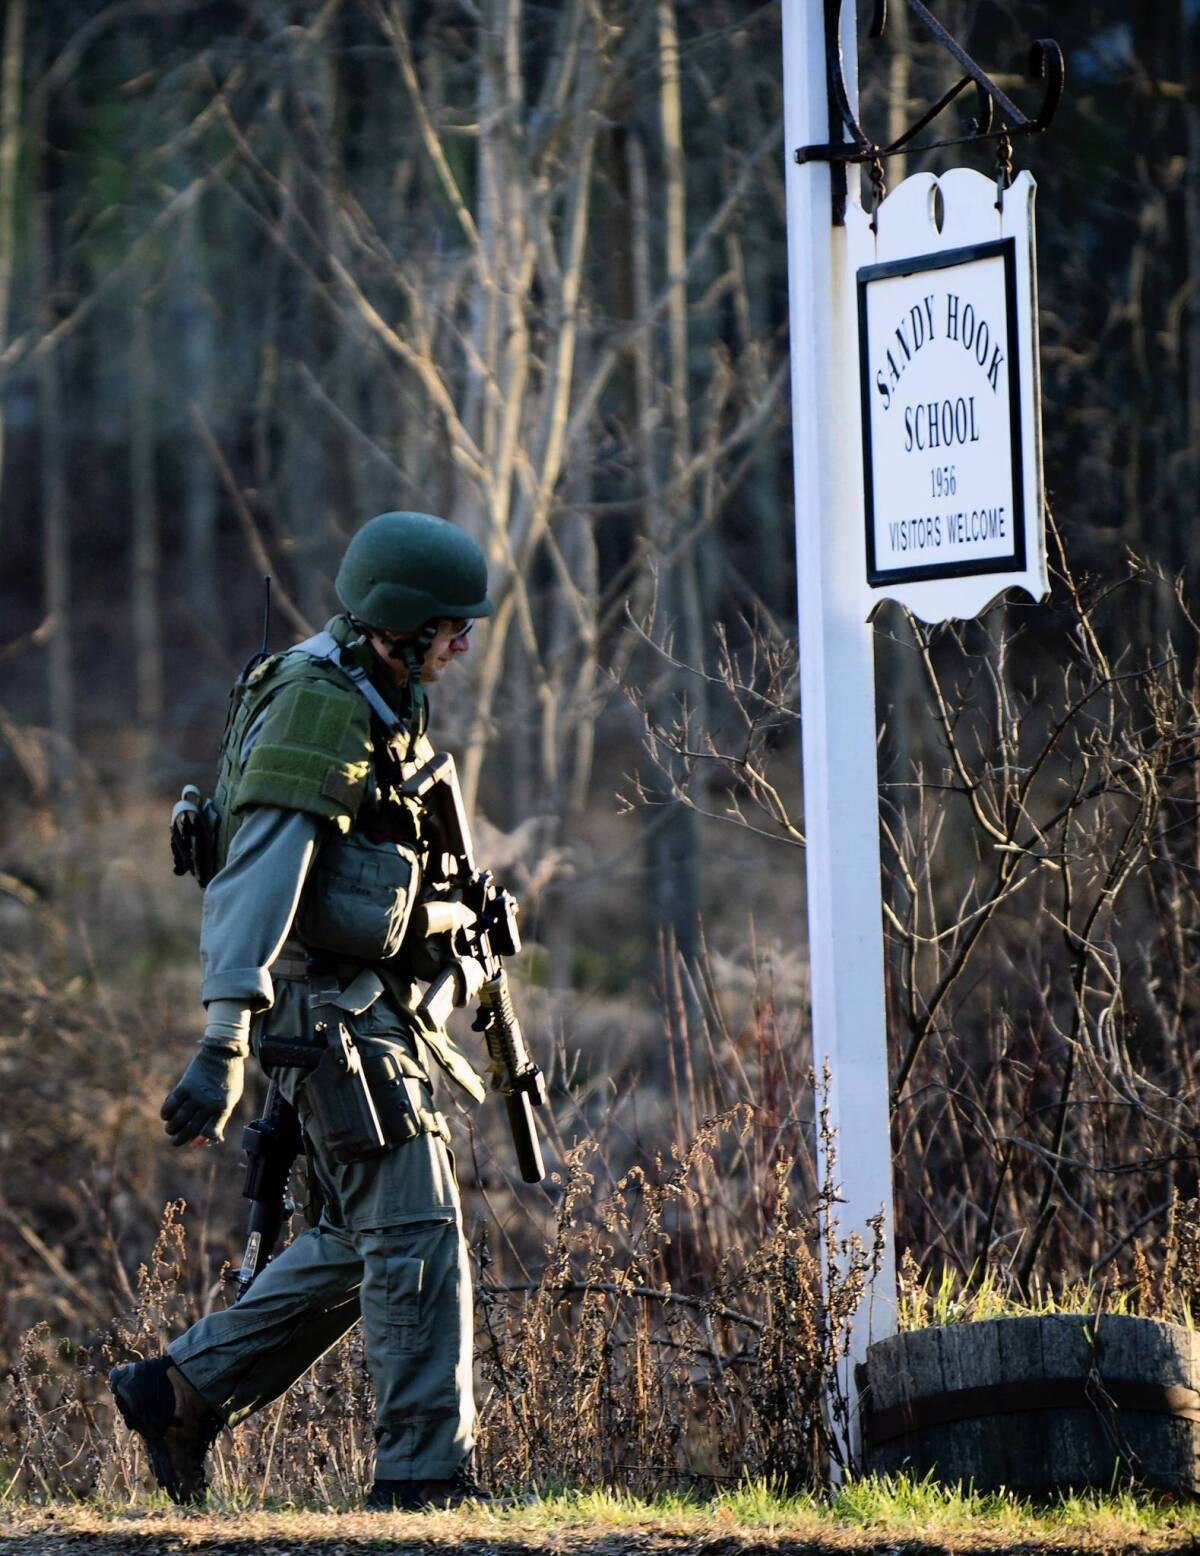 A state trooper leaves the Sandy School in Newtown, Conn., on Dec. 14, 2012.